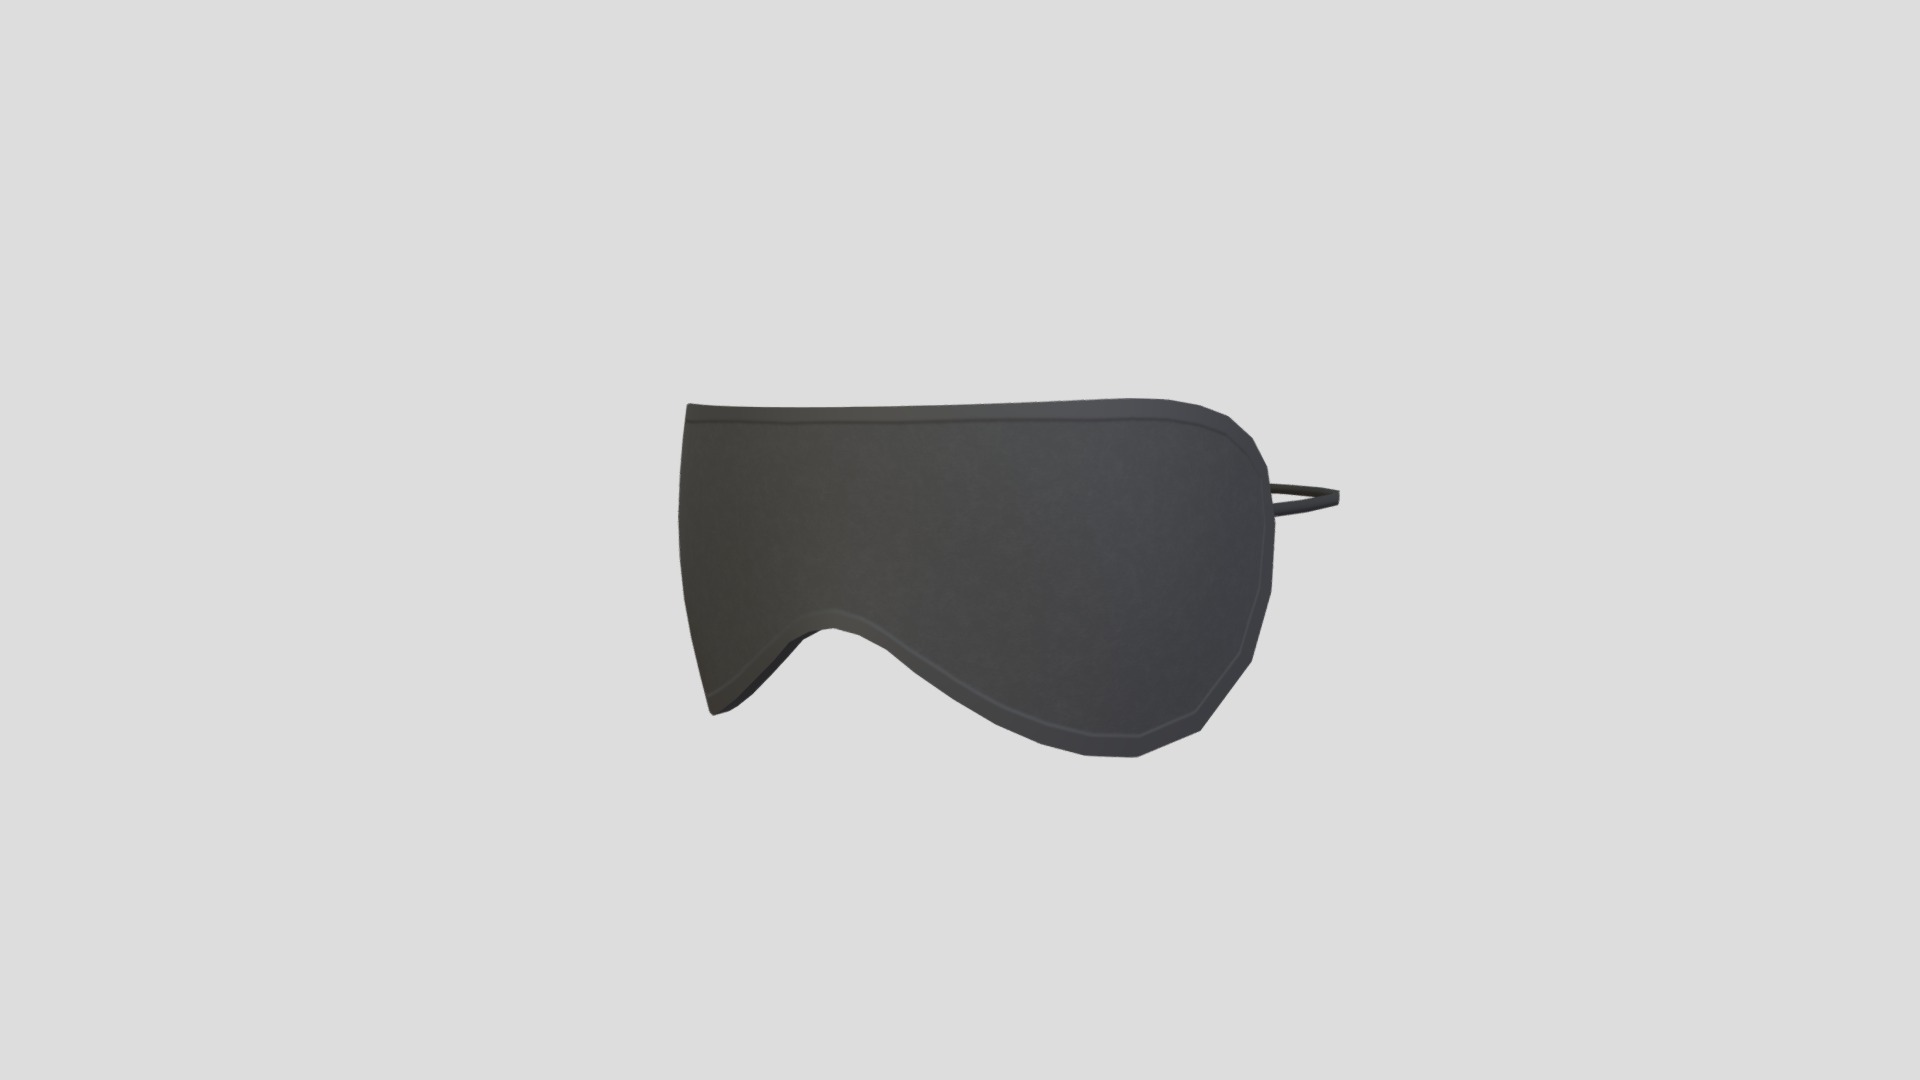 3D model Sleeping Eye Mask - This is a 3D model of the Sleeping Eye Mask. The 3D model is about a black computer mouse.